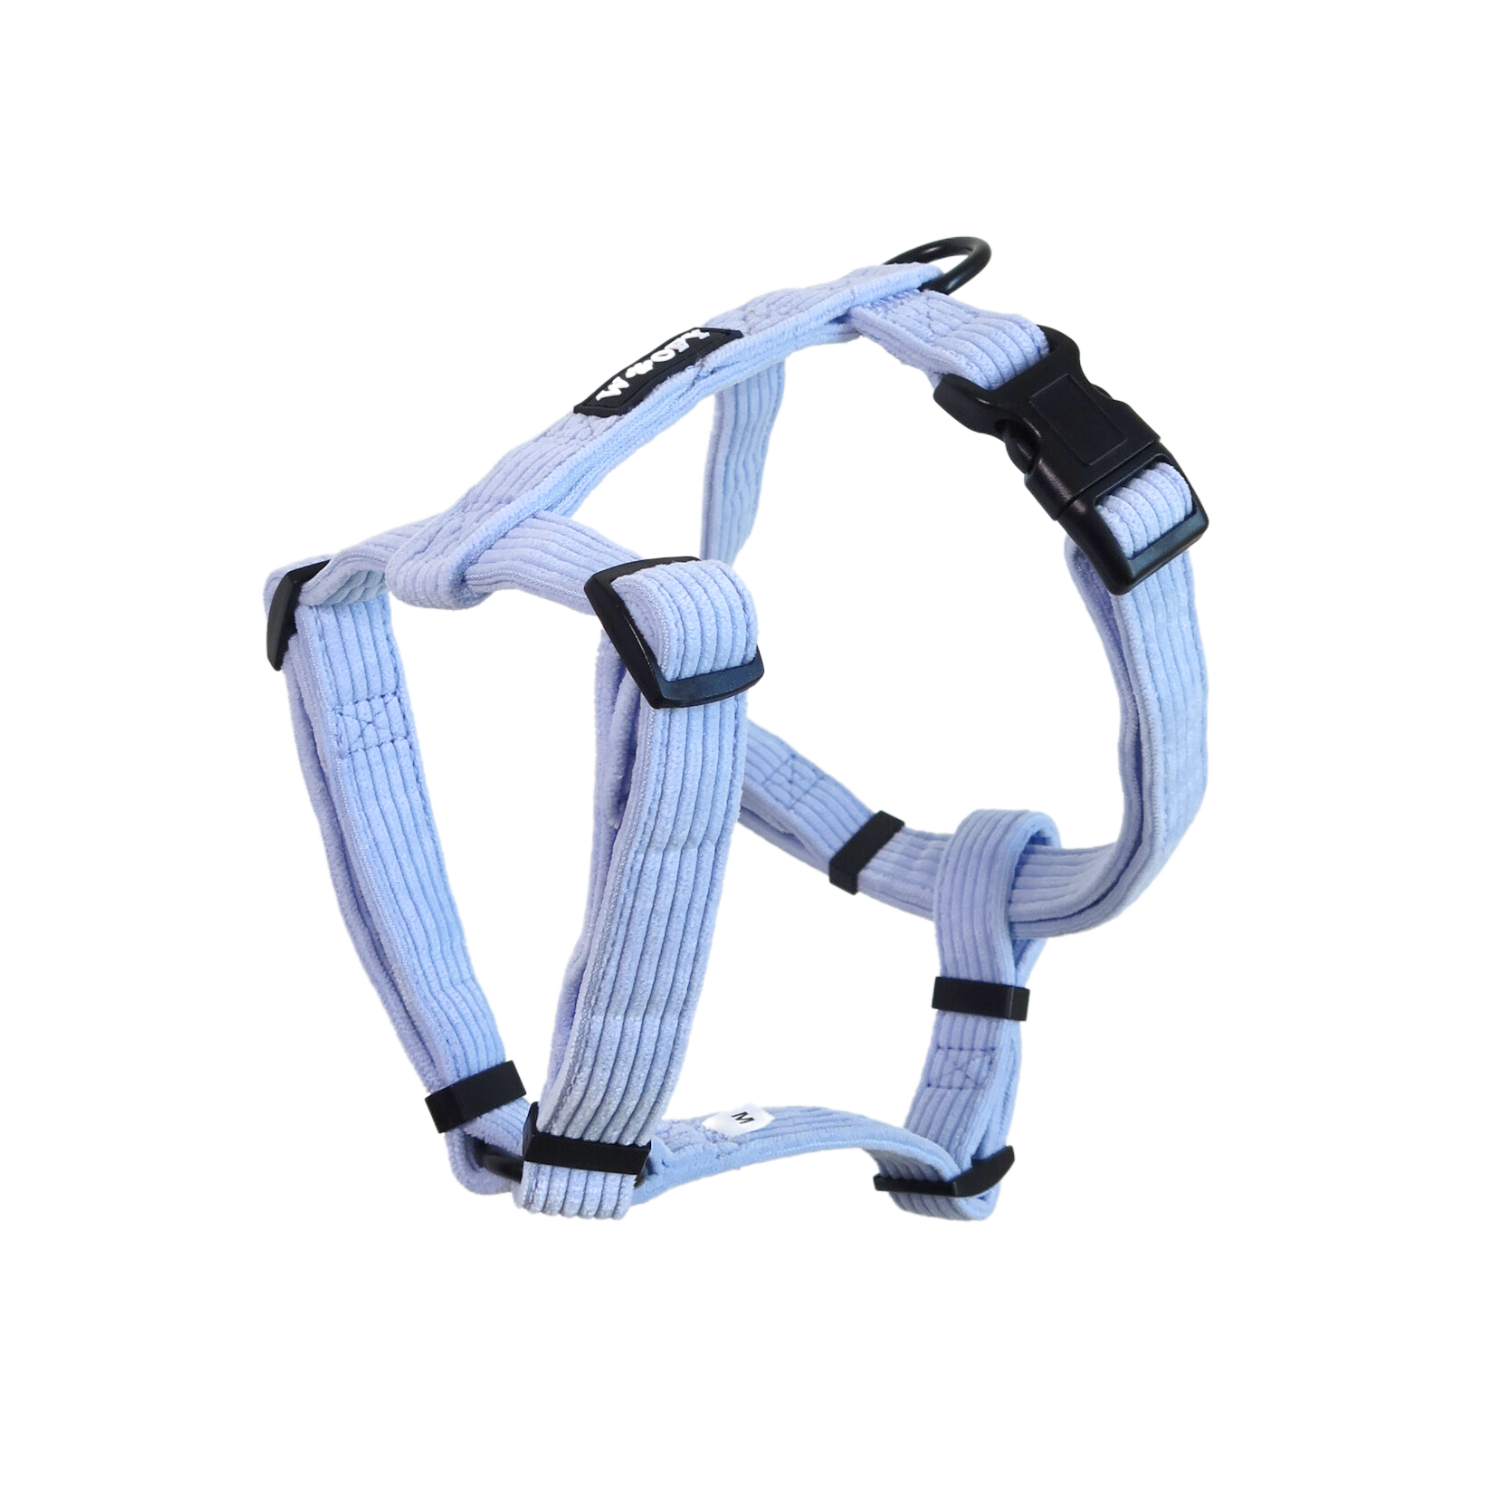 Y-harness for dog 